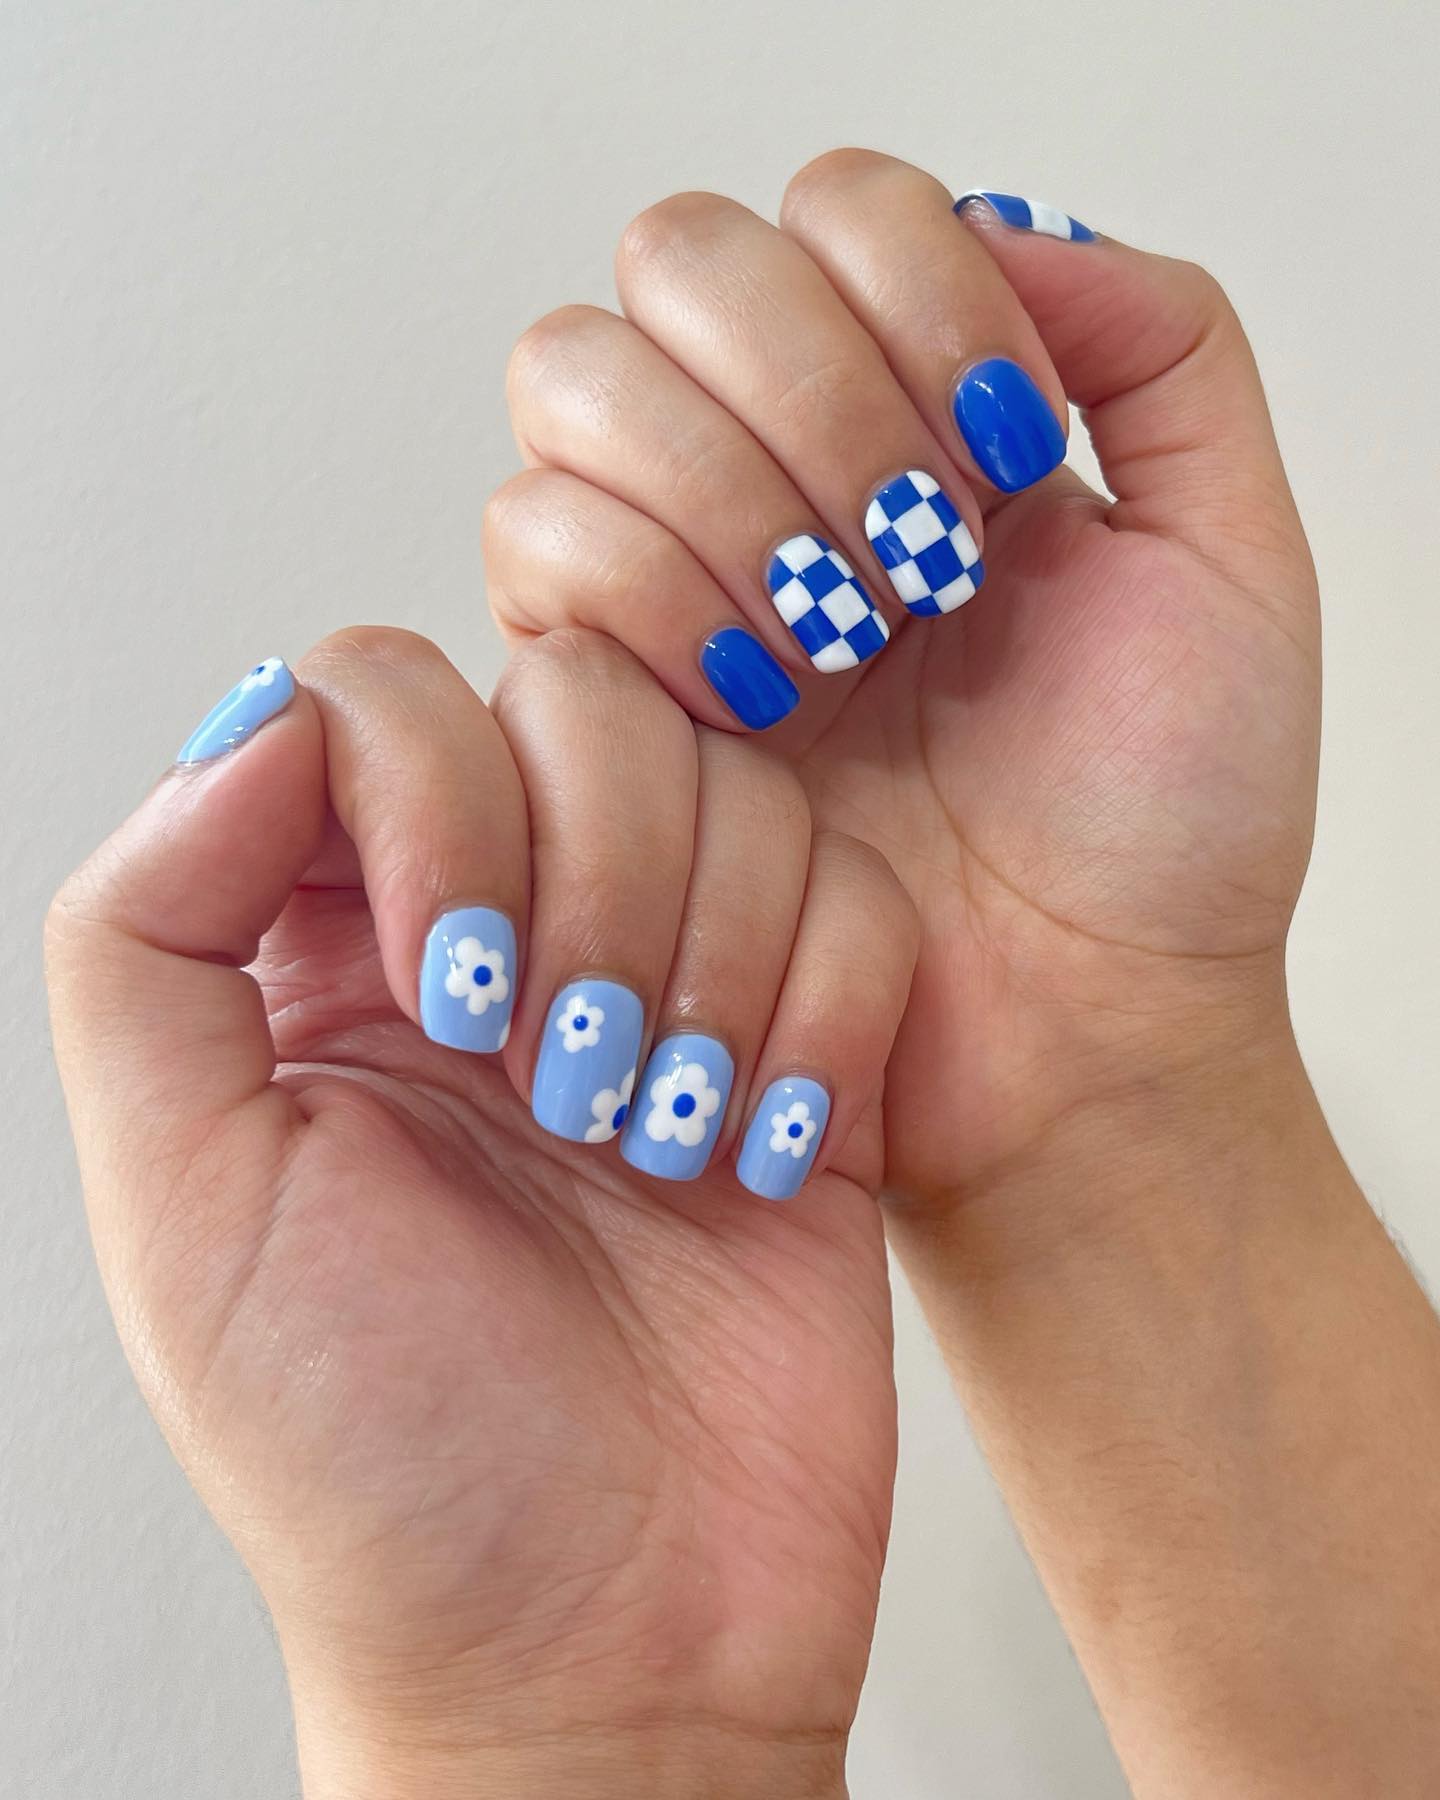 How to: A Beautiful Blue Nail Art Tutorial for Complete Beginners